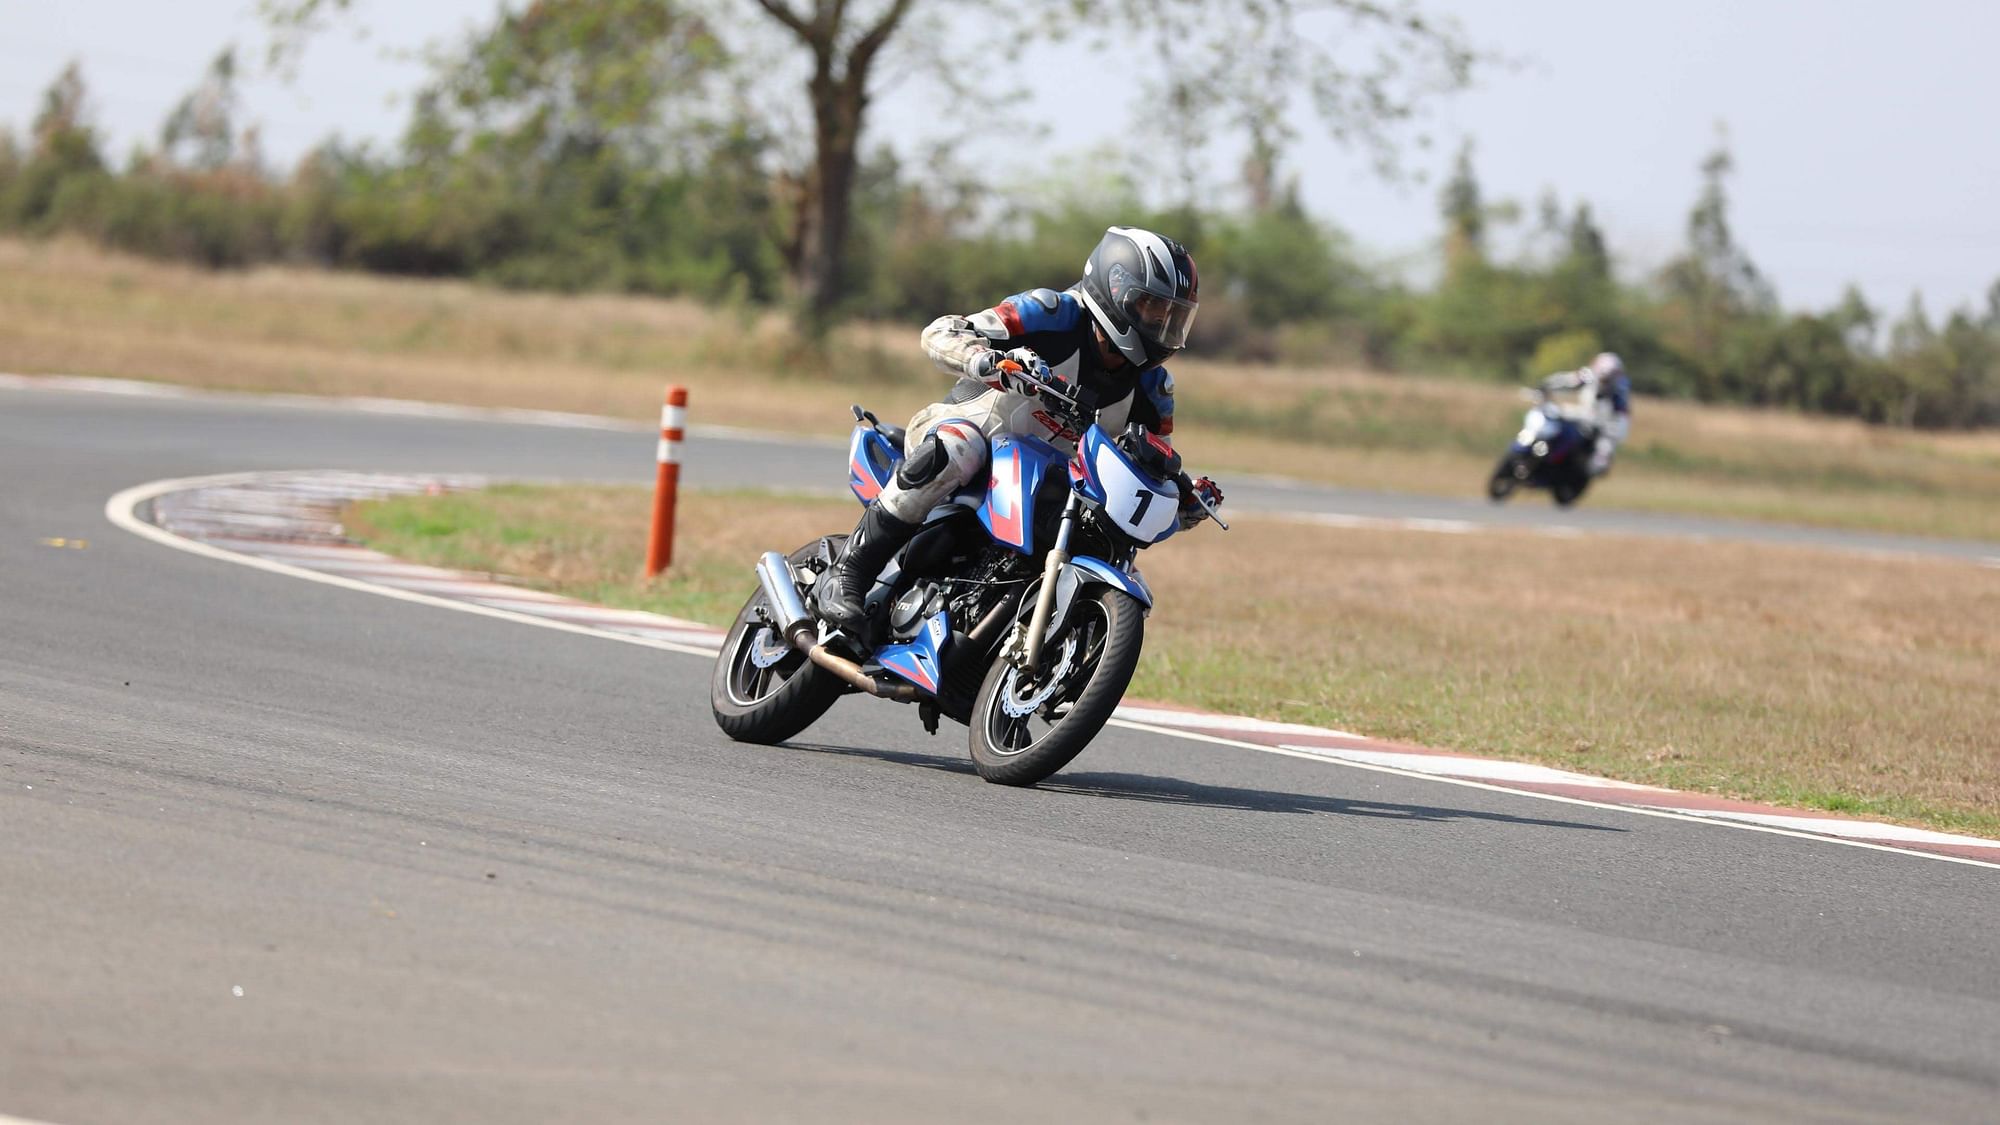 professional motorcycle racer distance around the track boehm